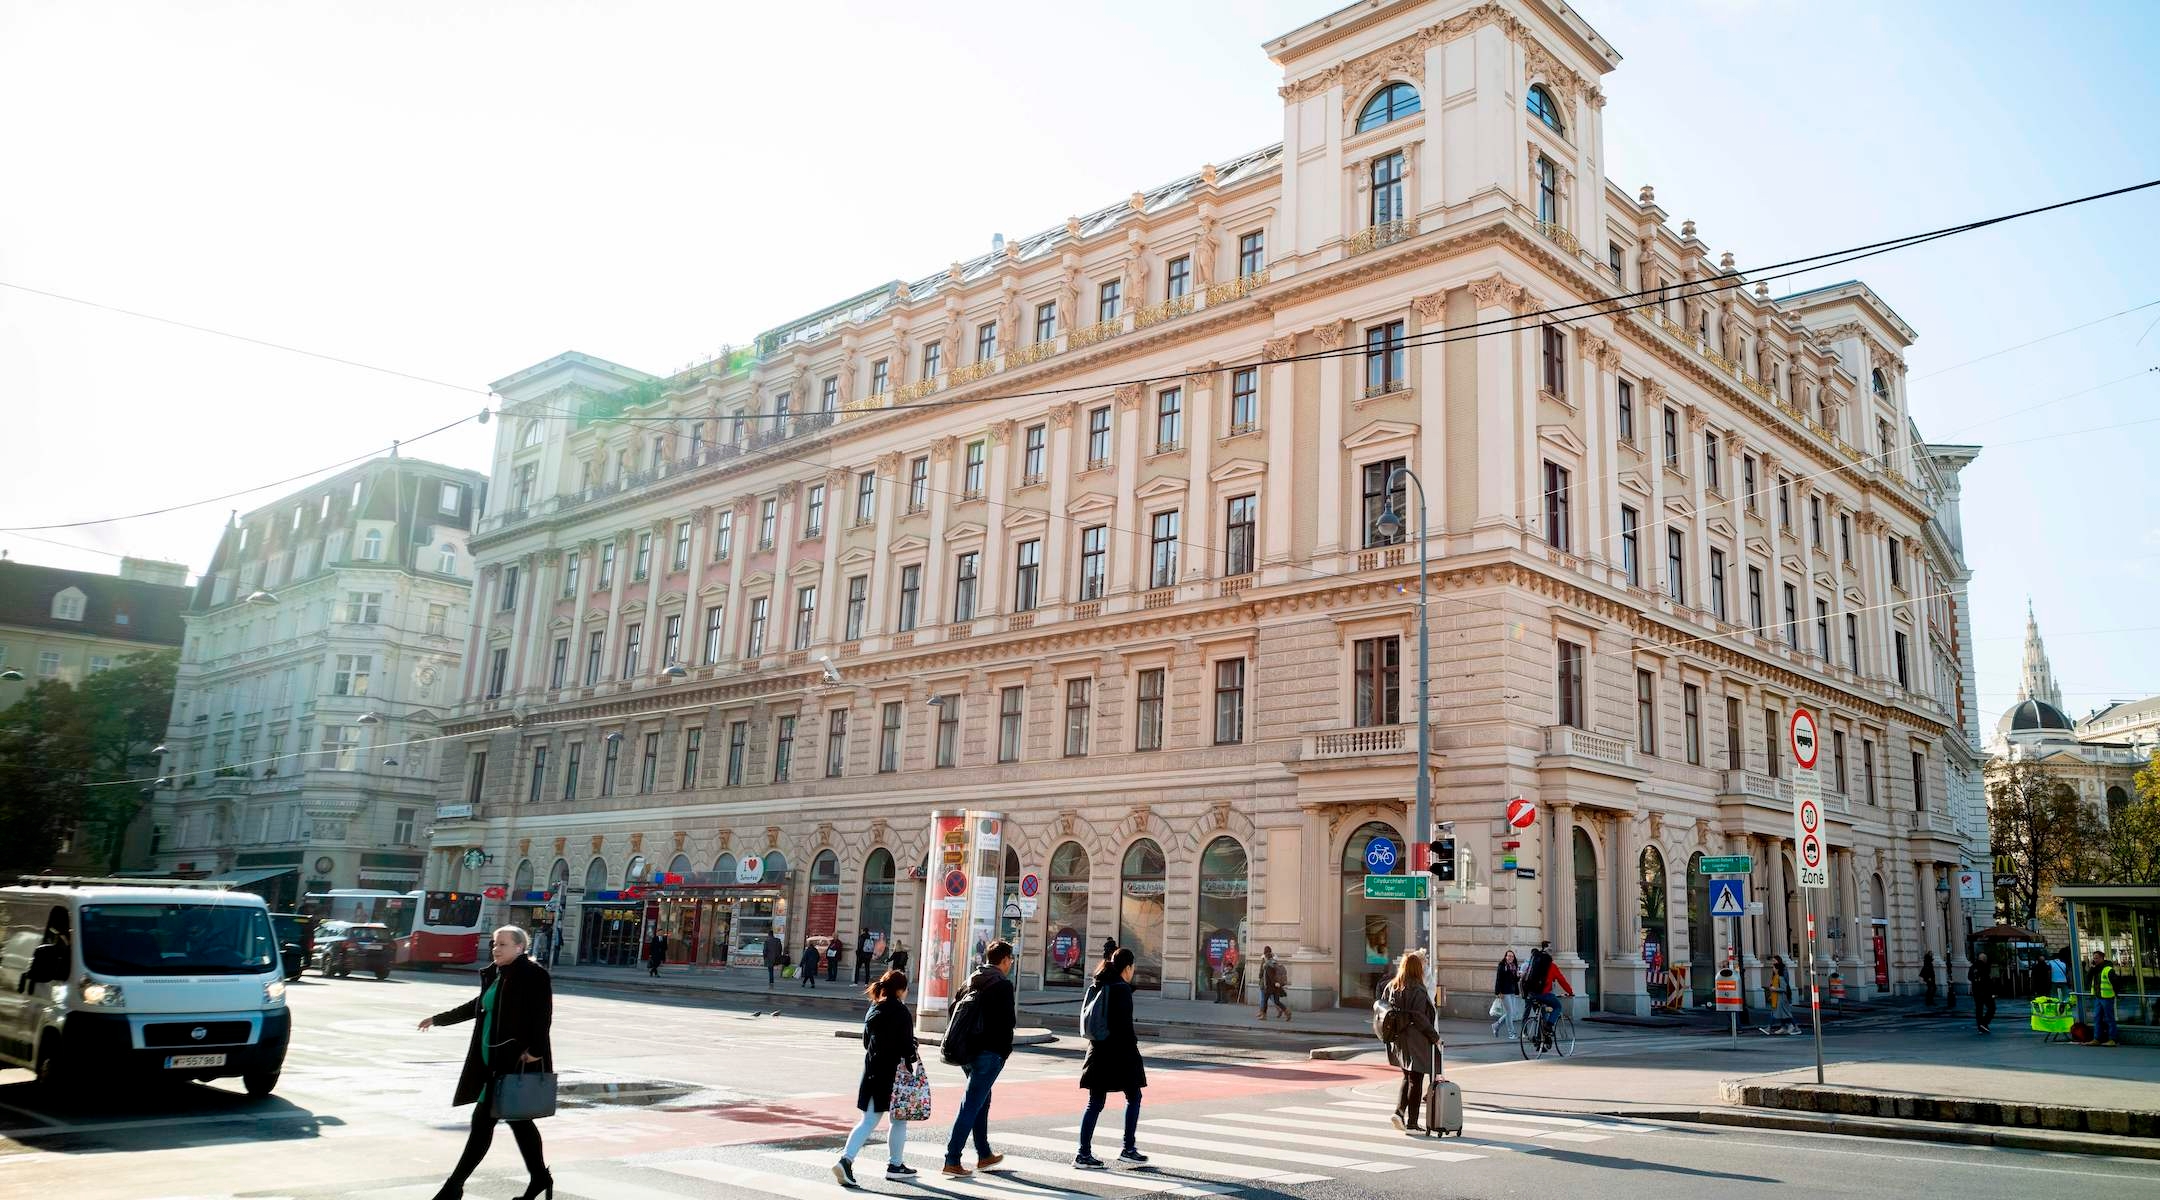 The Palais Ephrussi, seized by Nazis during WWII, is seen in Vienna, Nov. 7, 2019. (Joe Klamar/AFP via Getty Images)